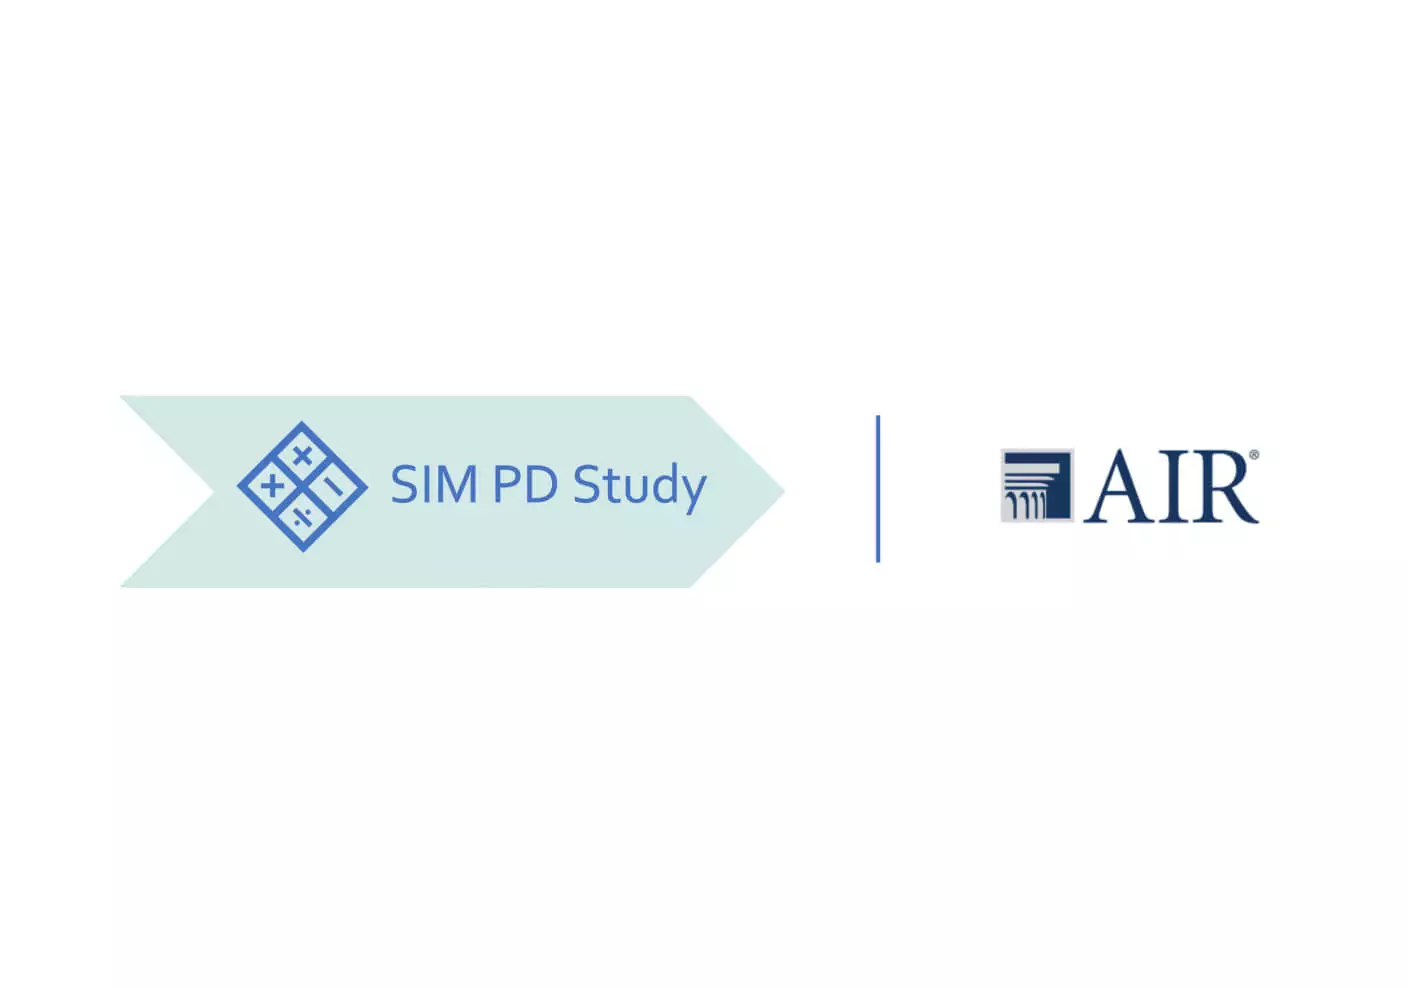 American Institutes for Research Experts Share Findings from Pilot of New SIM PD Study